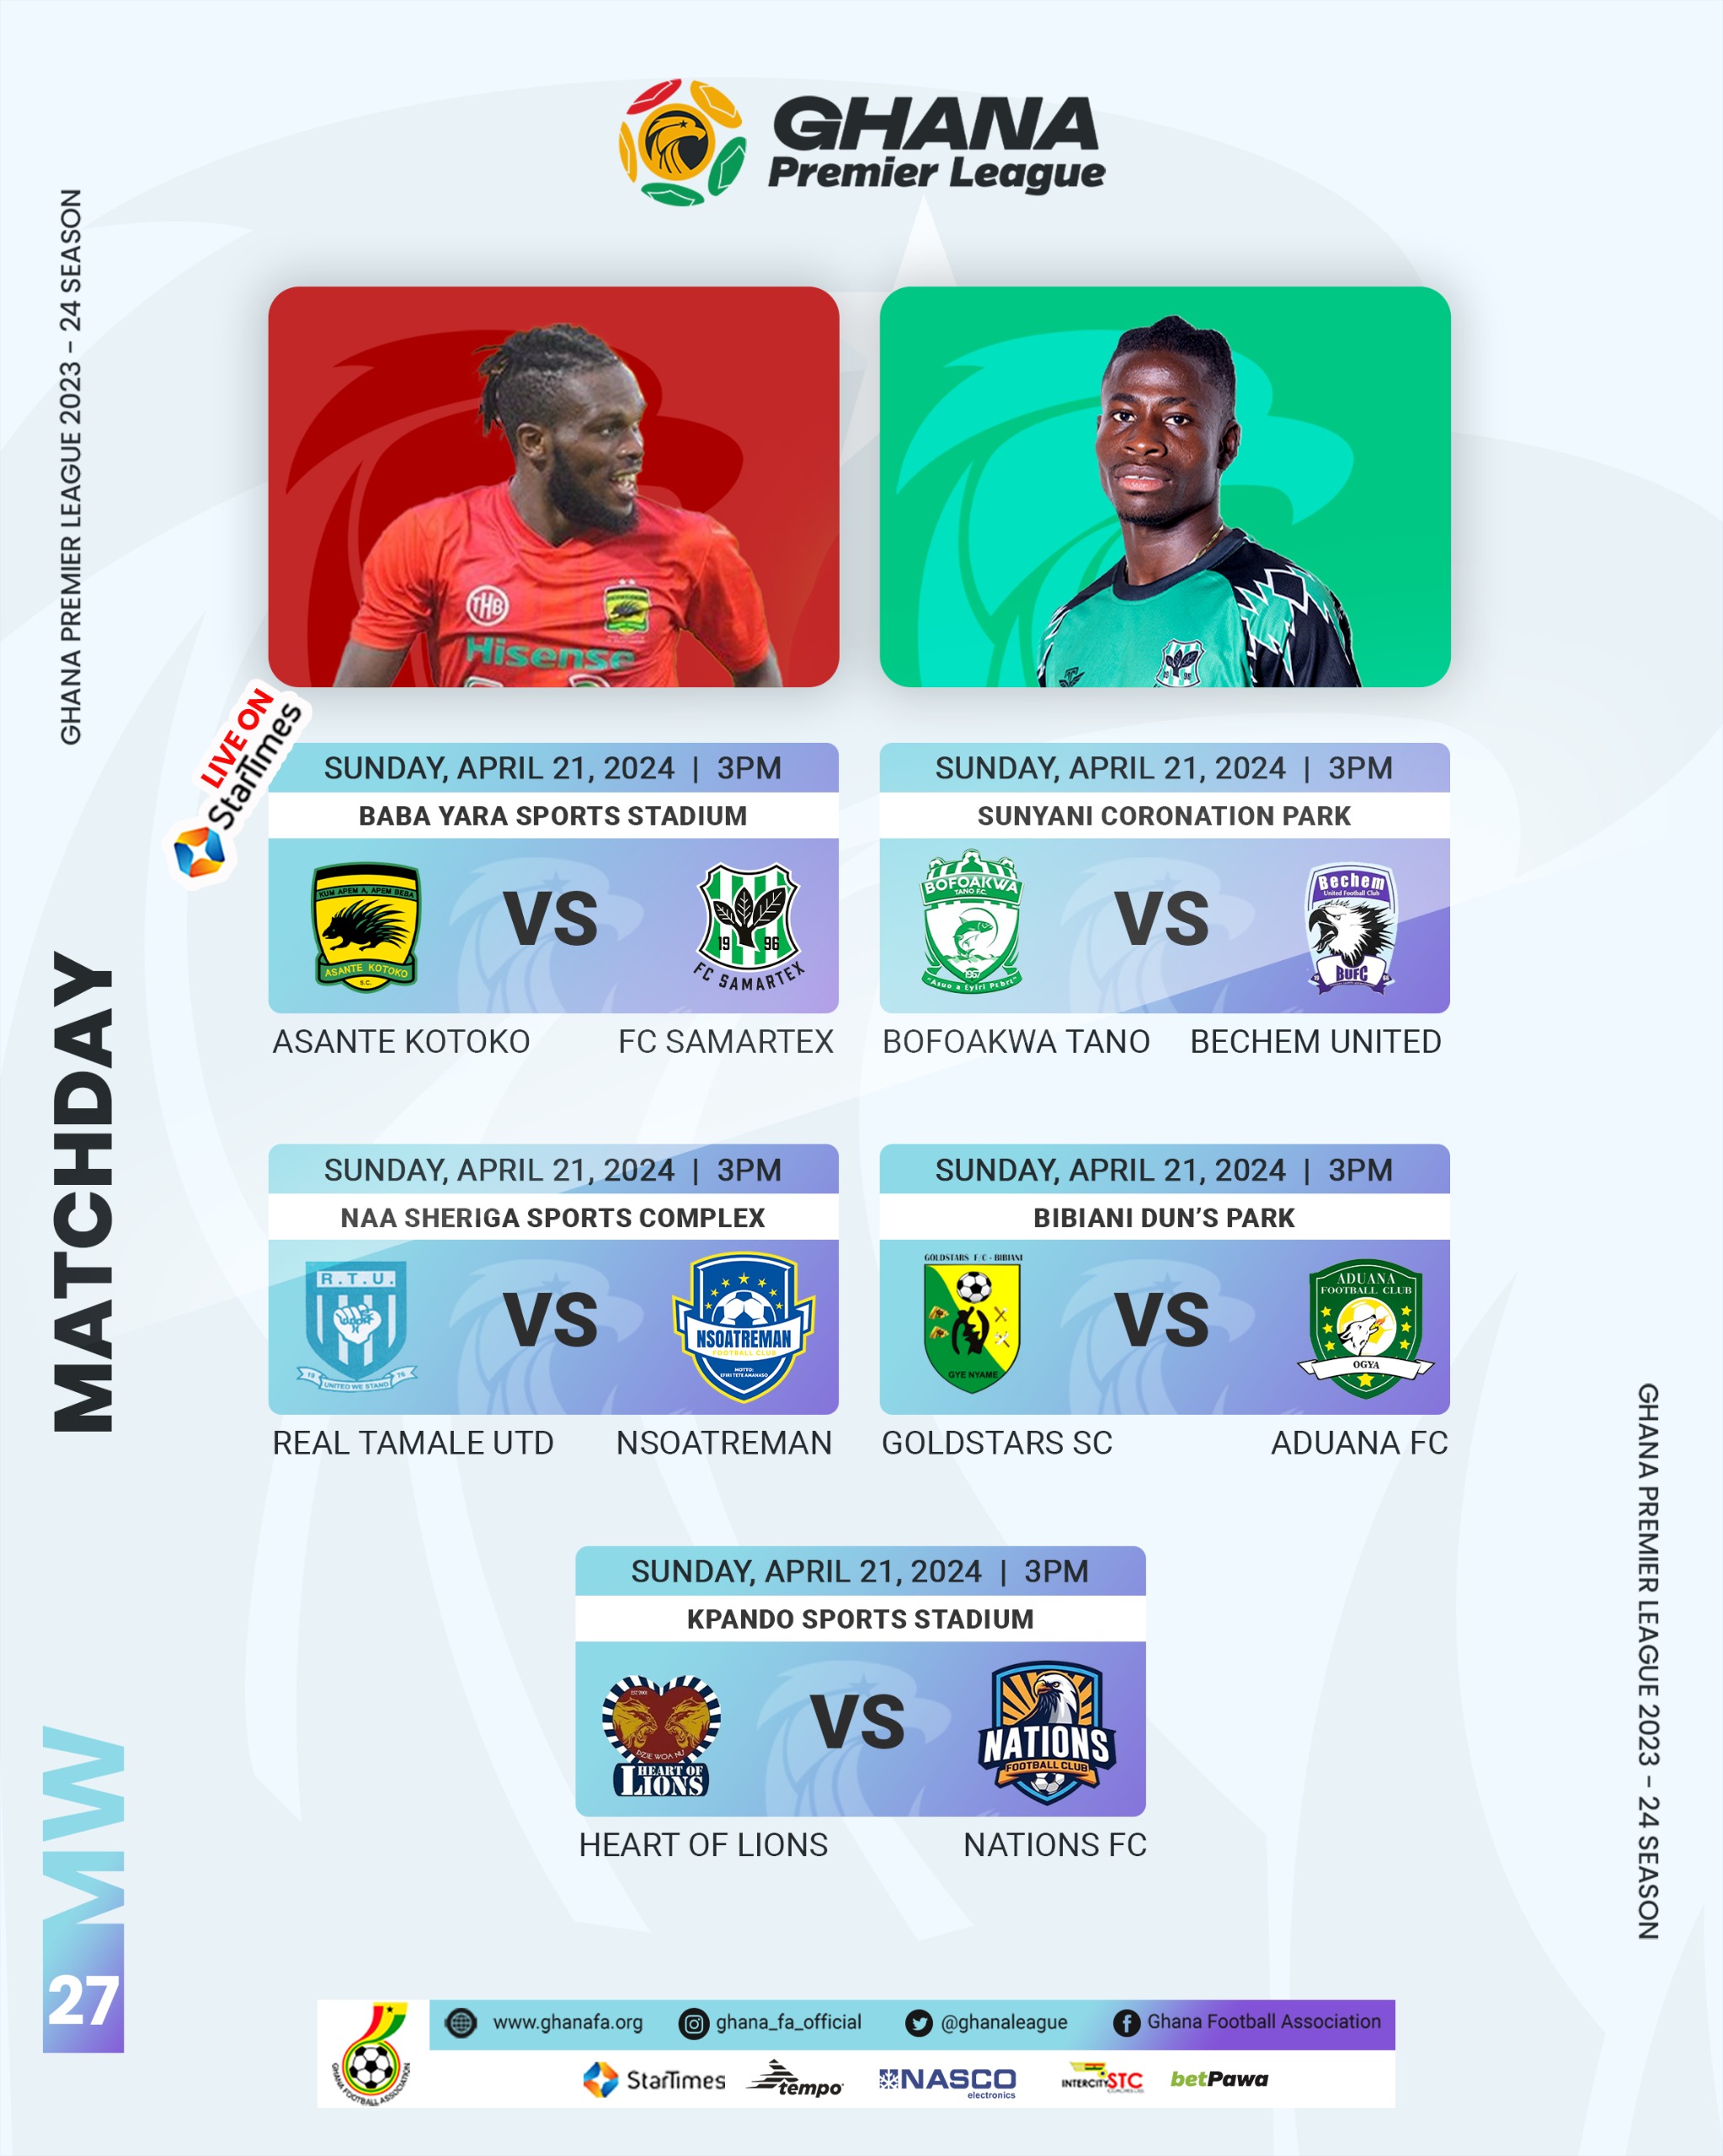 Match-by-Match Preview for matchday 27 of Ghana Premier League